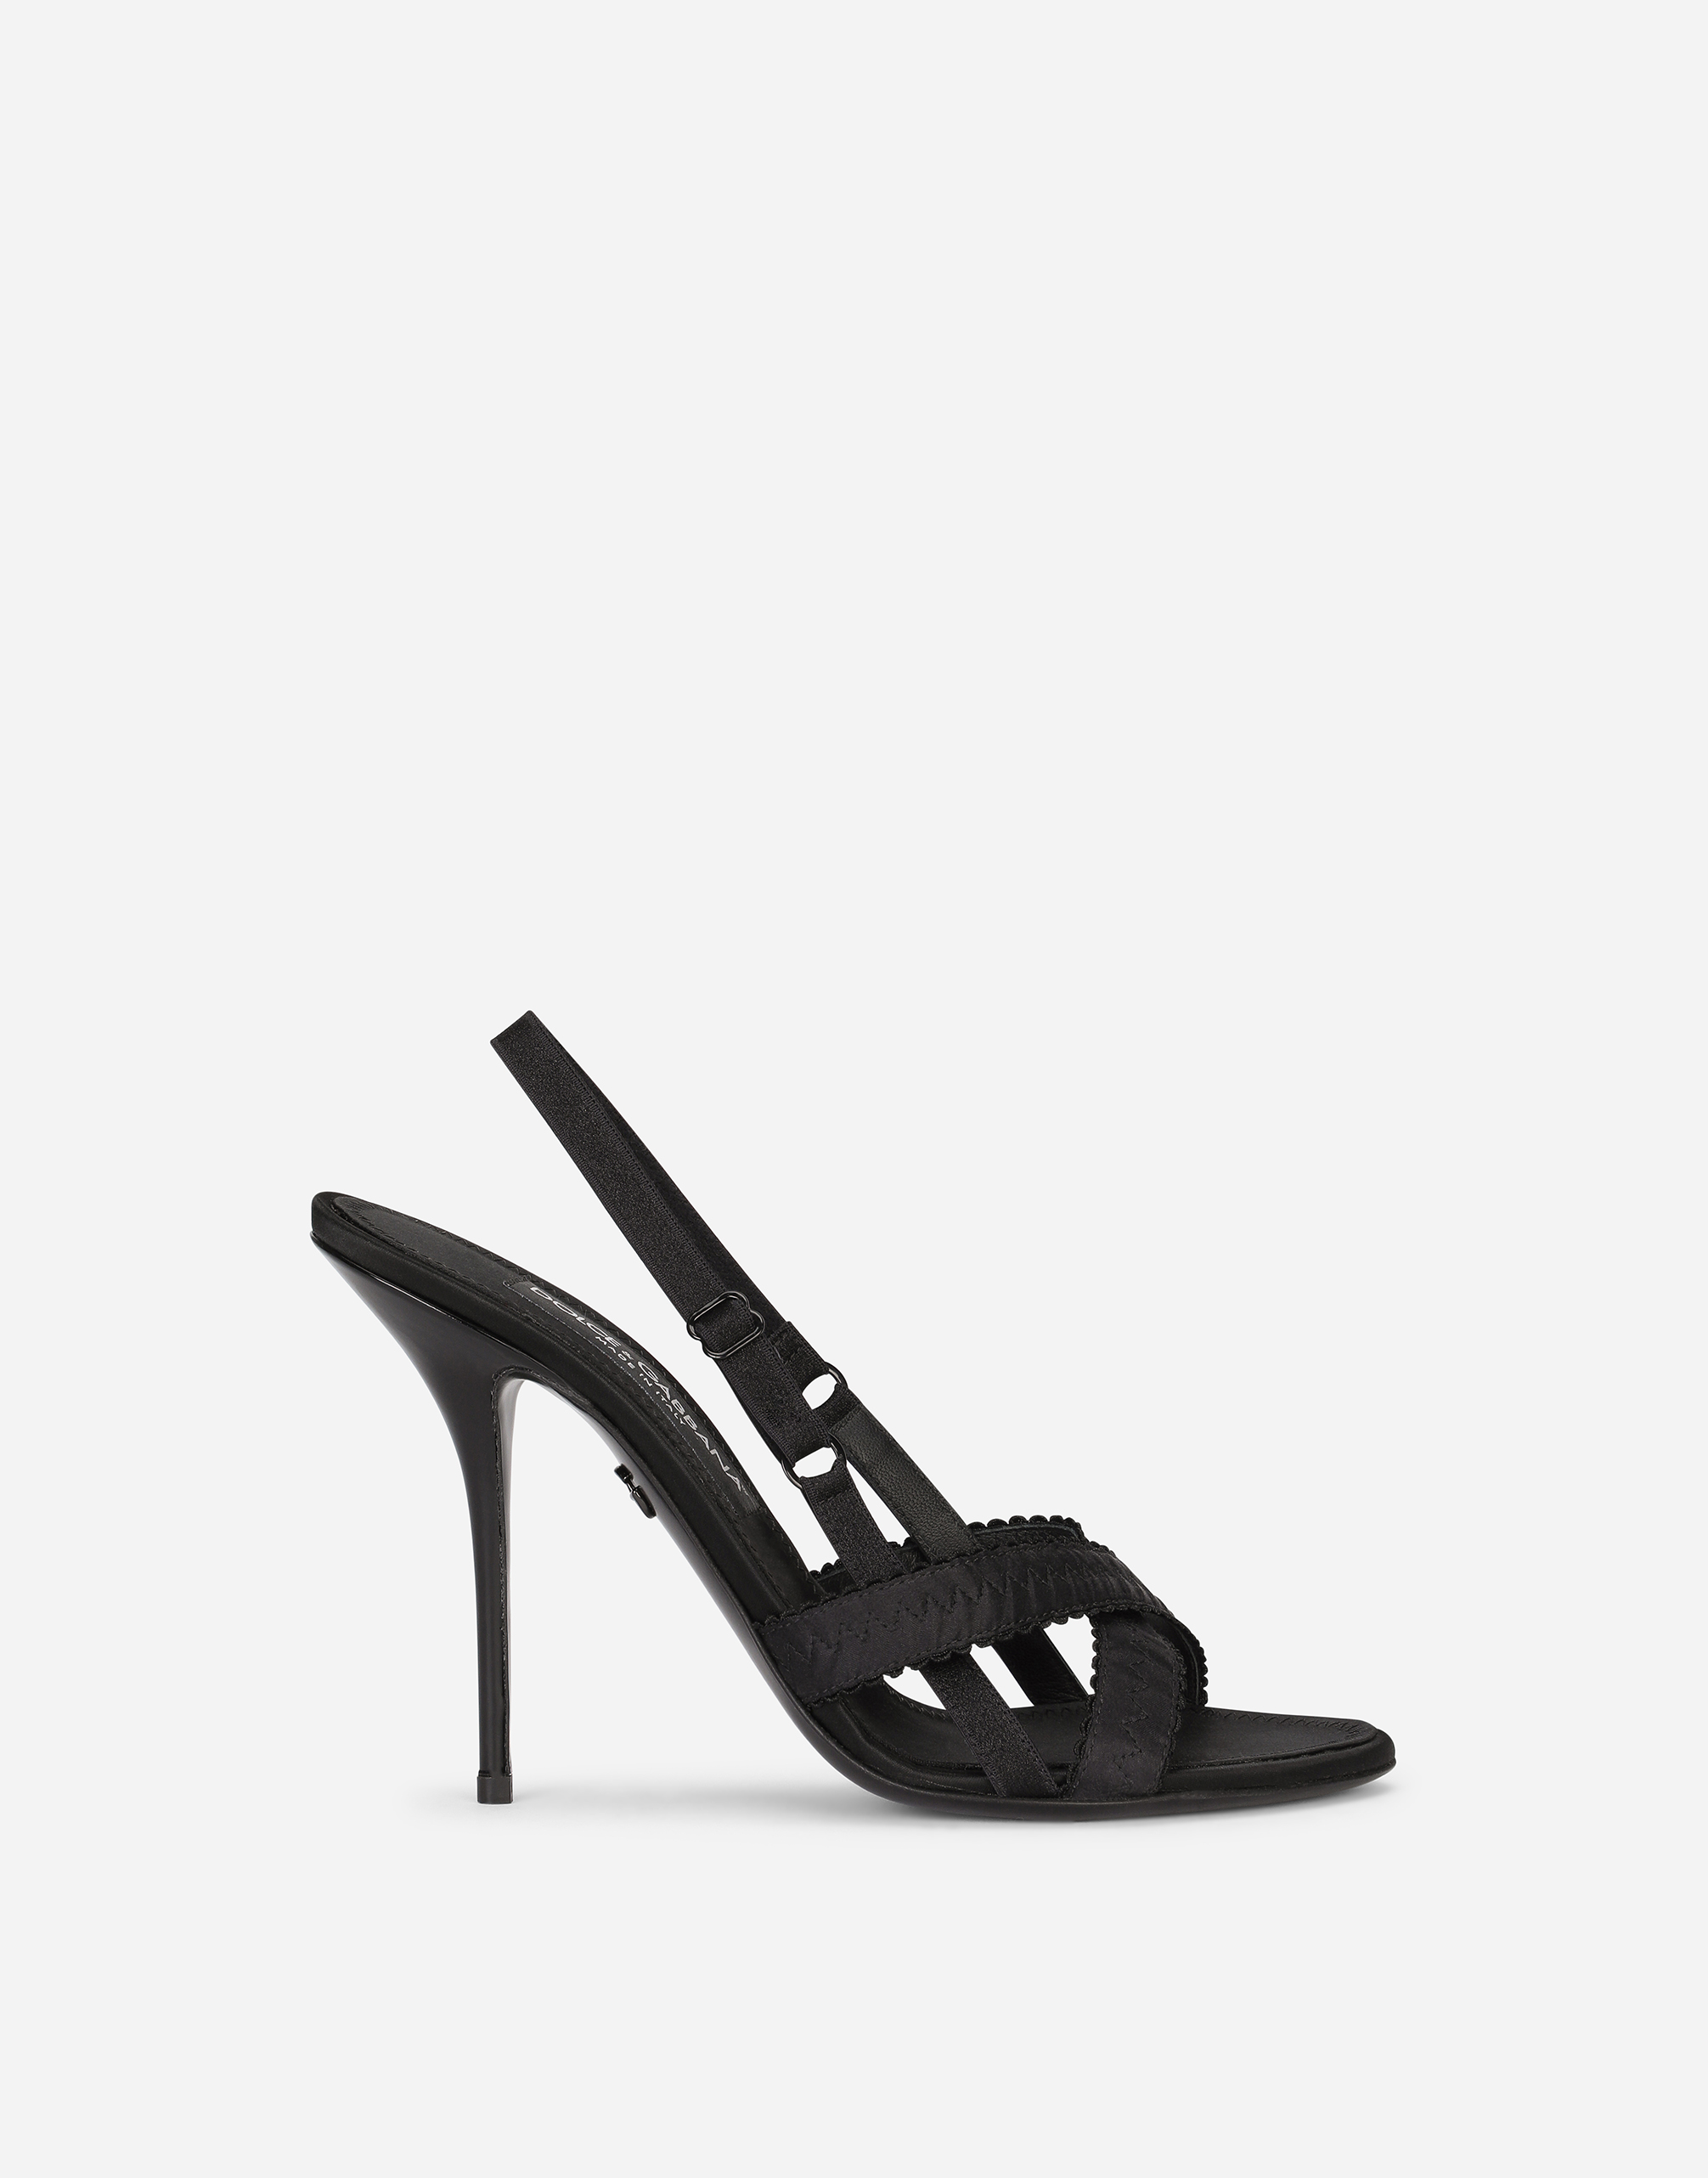 Corset-style satin sandals in Black